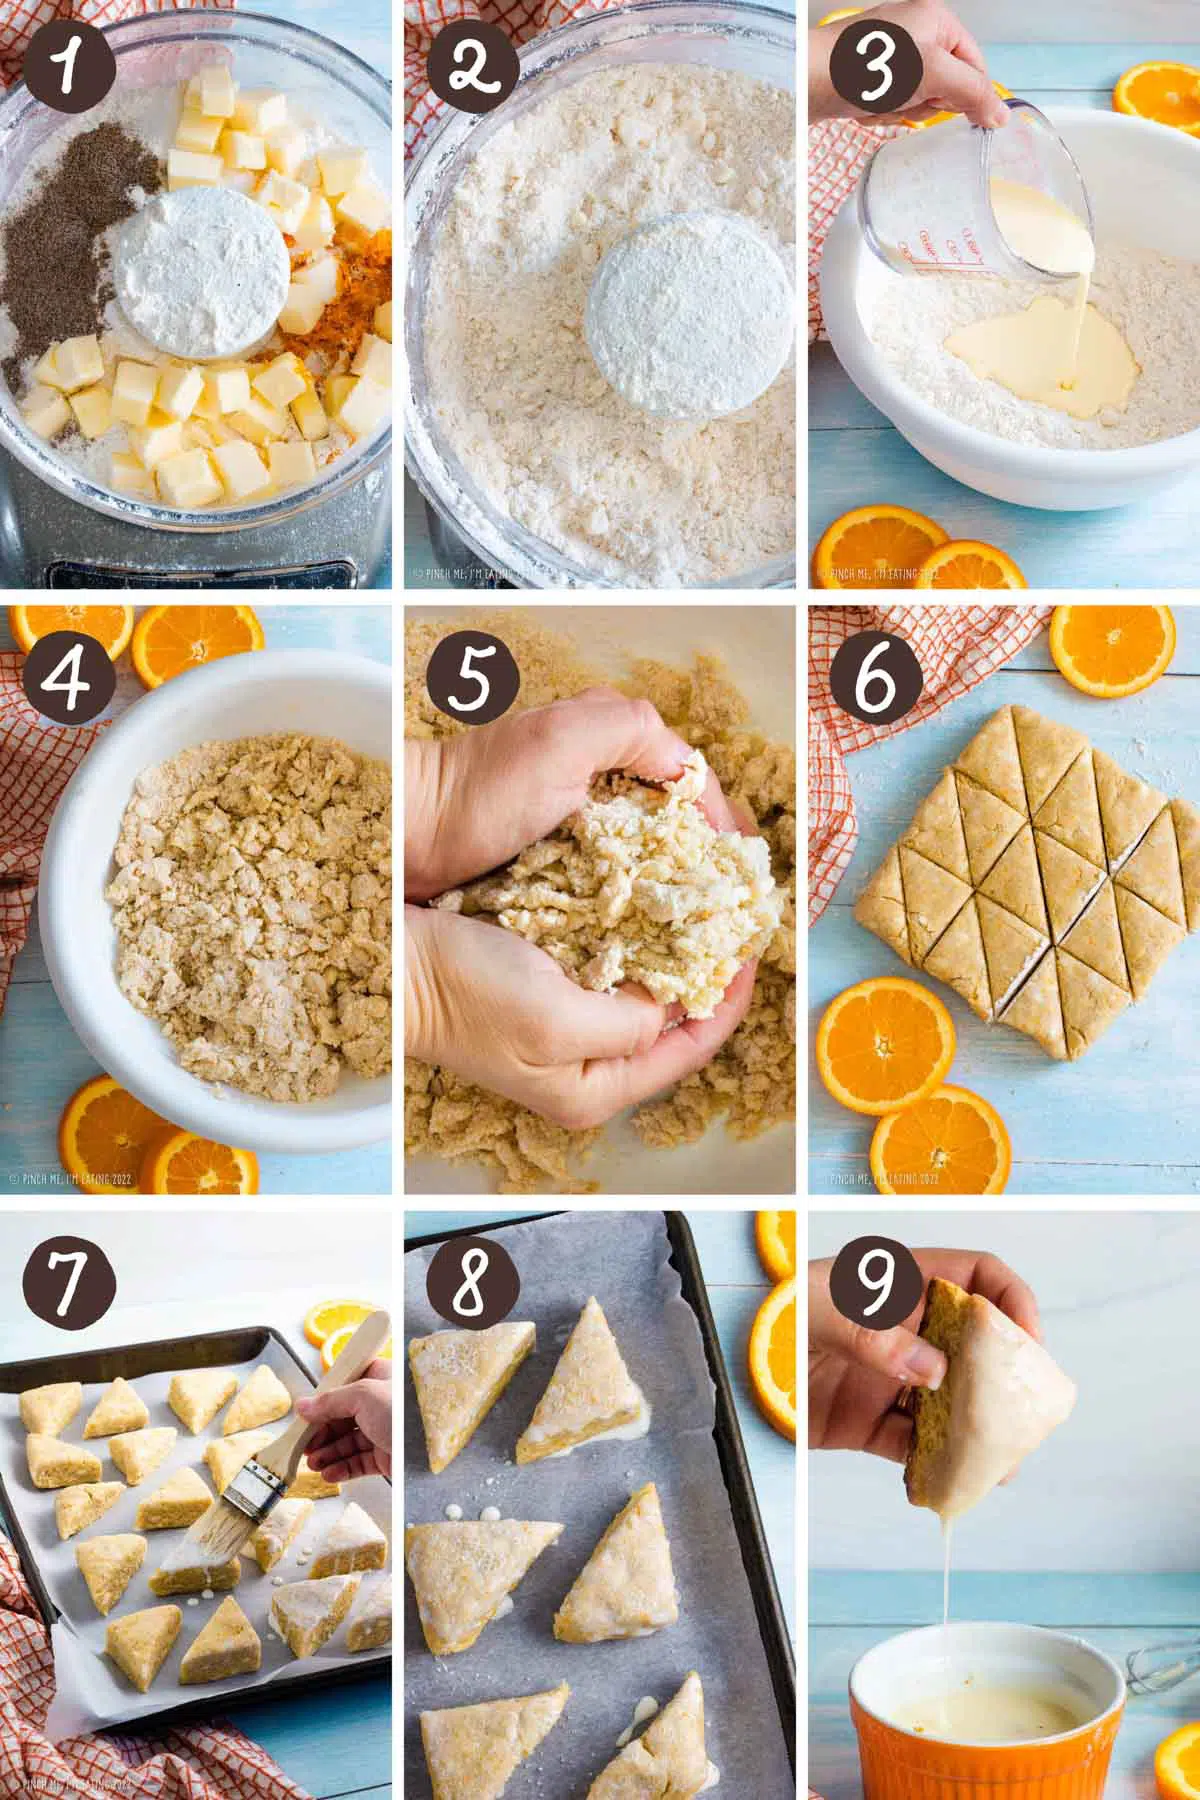 Step by step photos for making homemade glazed orange scones with a food processor.